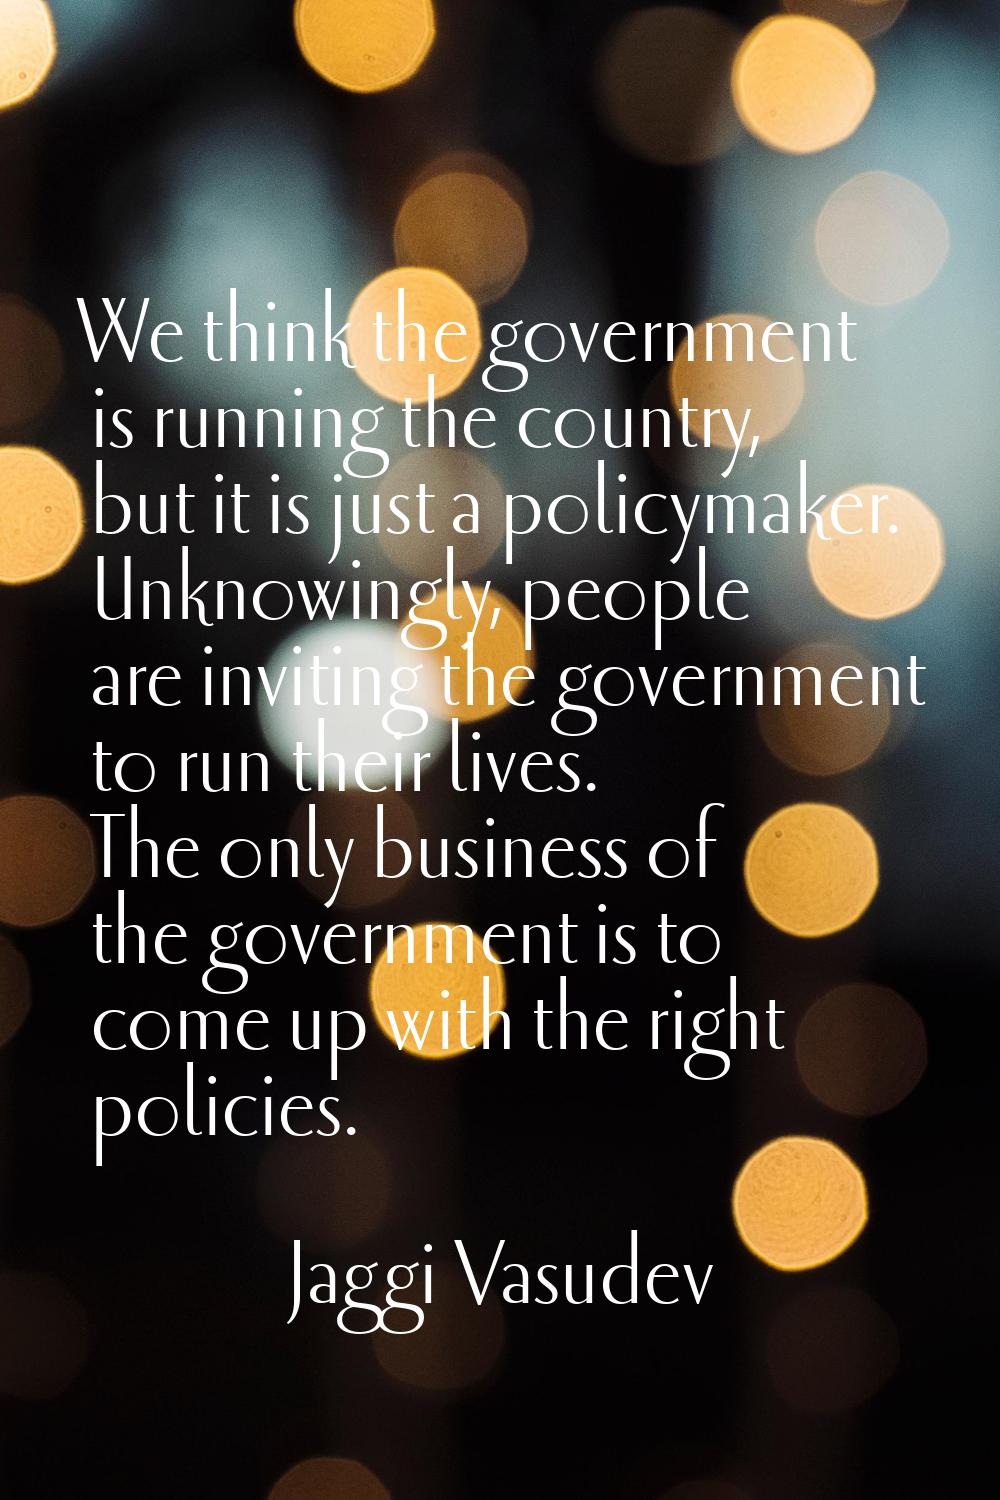 We think the government is running the country, but it is just a policymaker. Unknowingly, people a